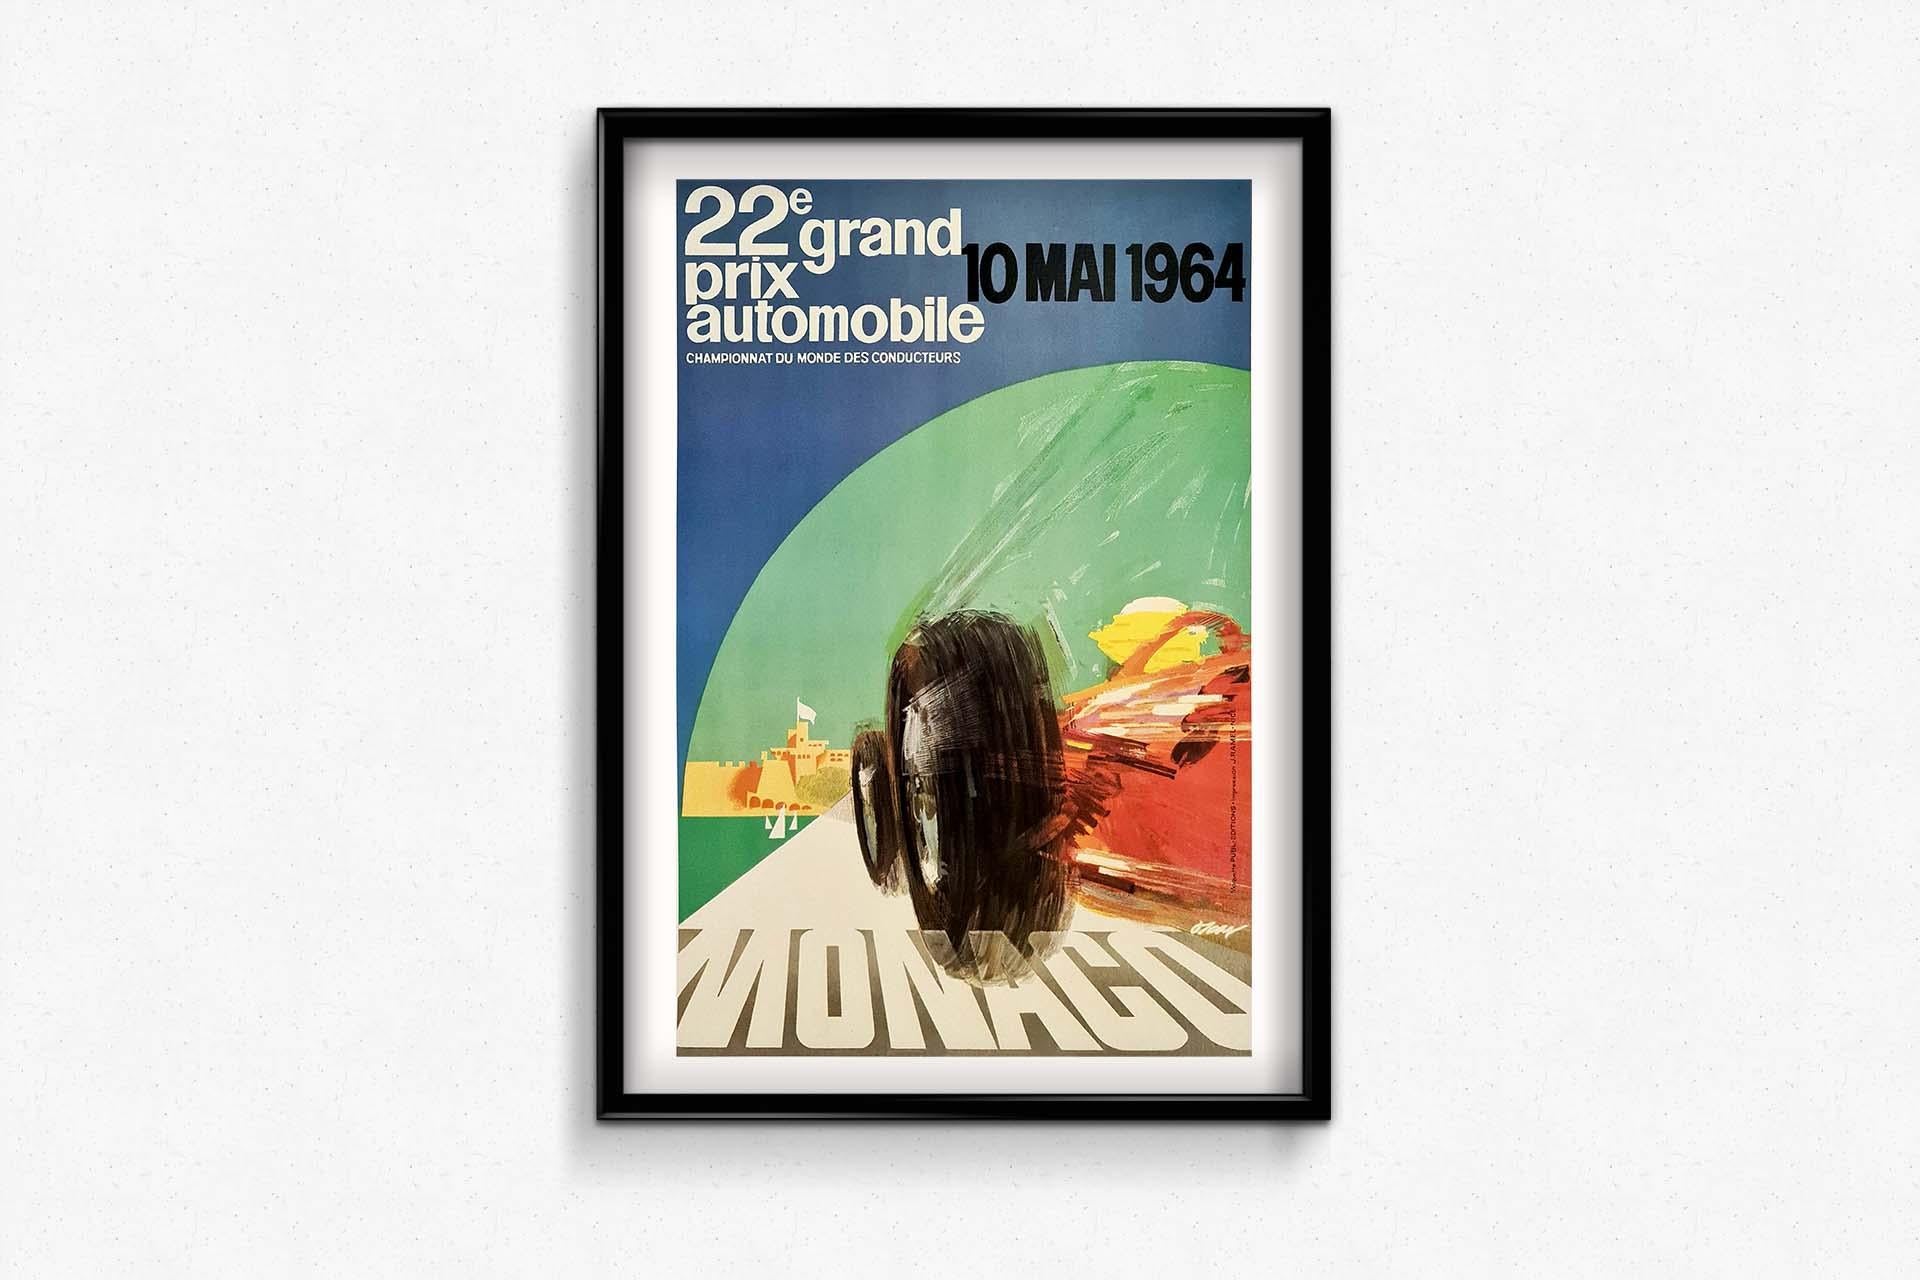 Beautiful poster of May for the 22nd Grand Prix of Monaco in 1964. The 1964 Monaco Grand Prix (XXII Monaco Grand Prix), held on the Monaco circuit on May 10, 1964, was the one hundred and twenty-second round of the Formula One World Championship